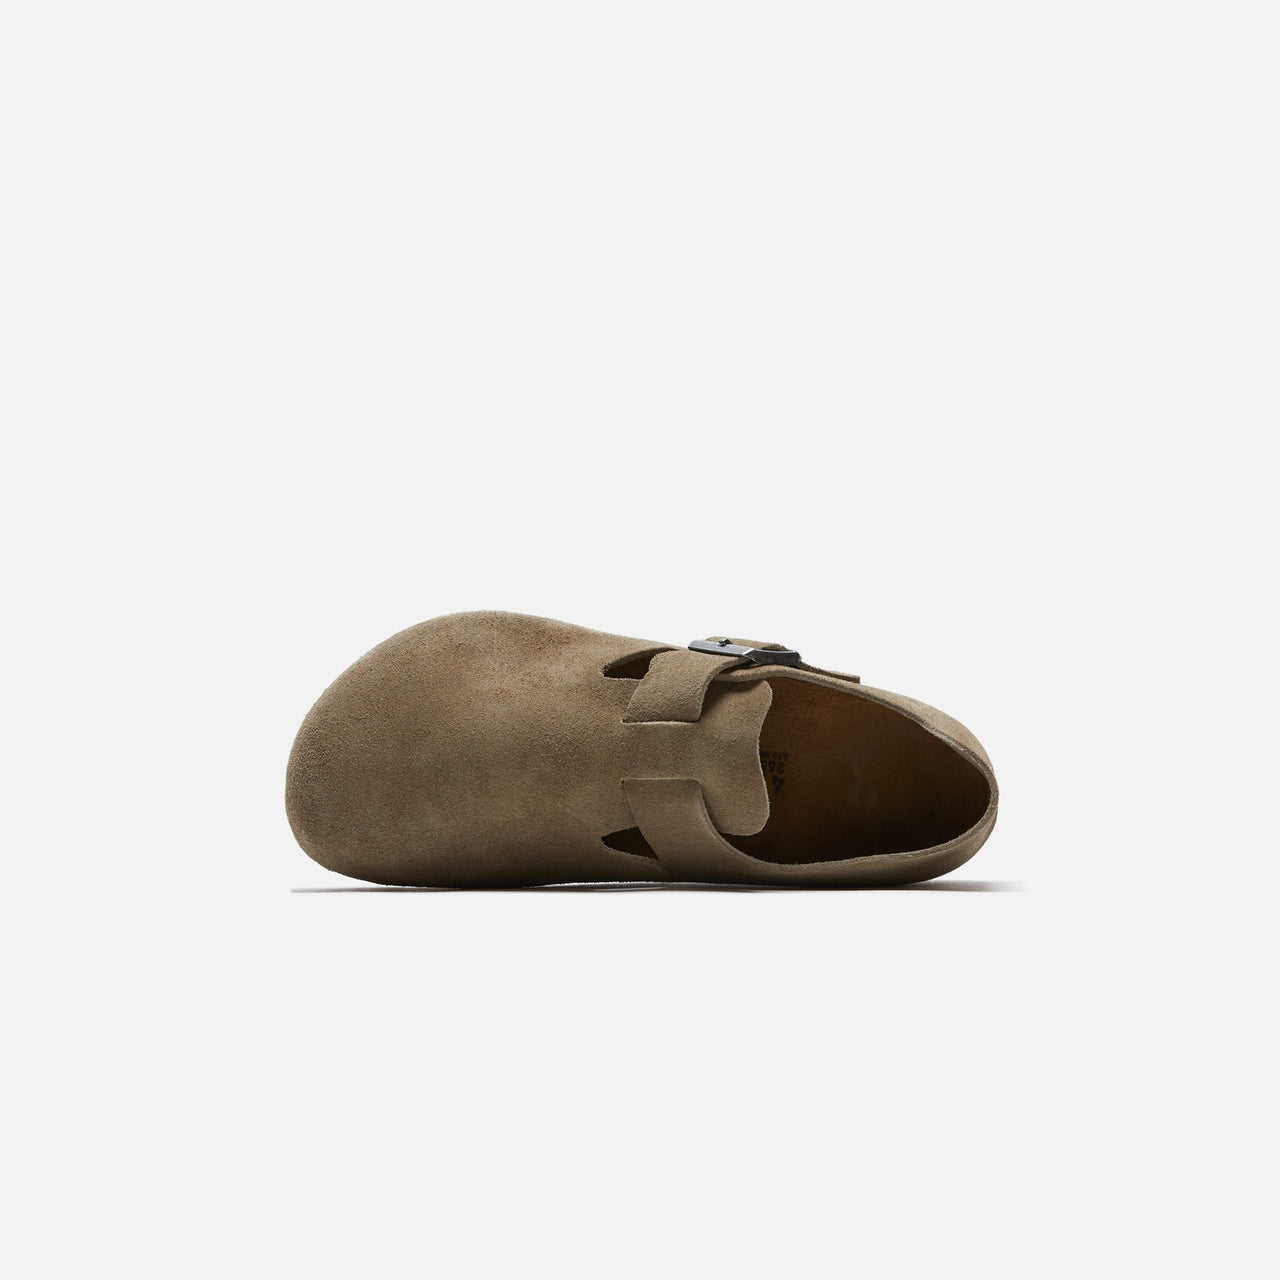 Classic Birkenstock London Suede Taupe shoes with durable rubber sole